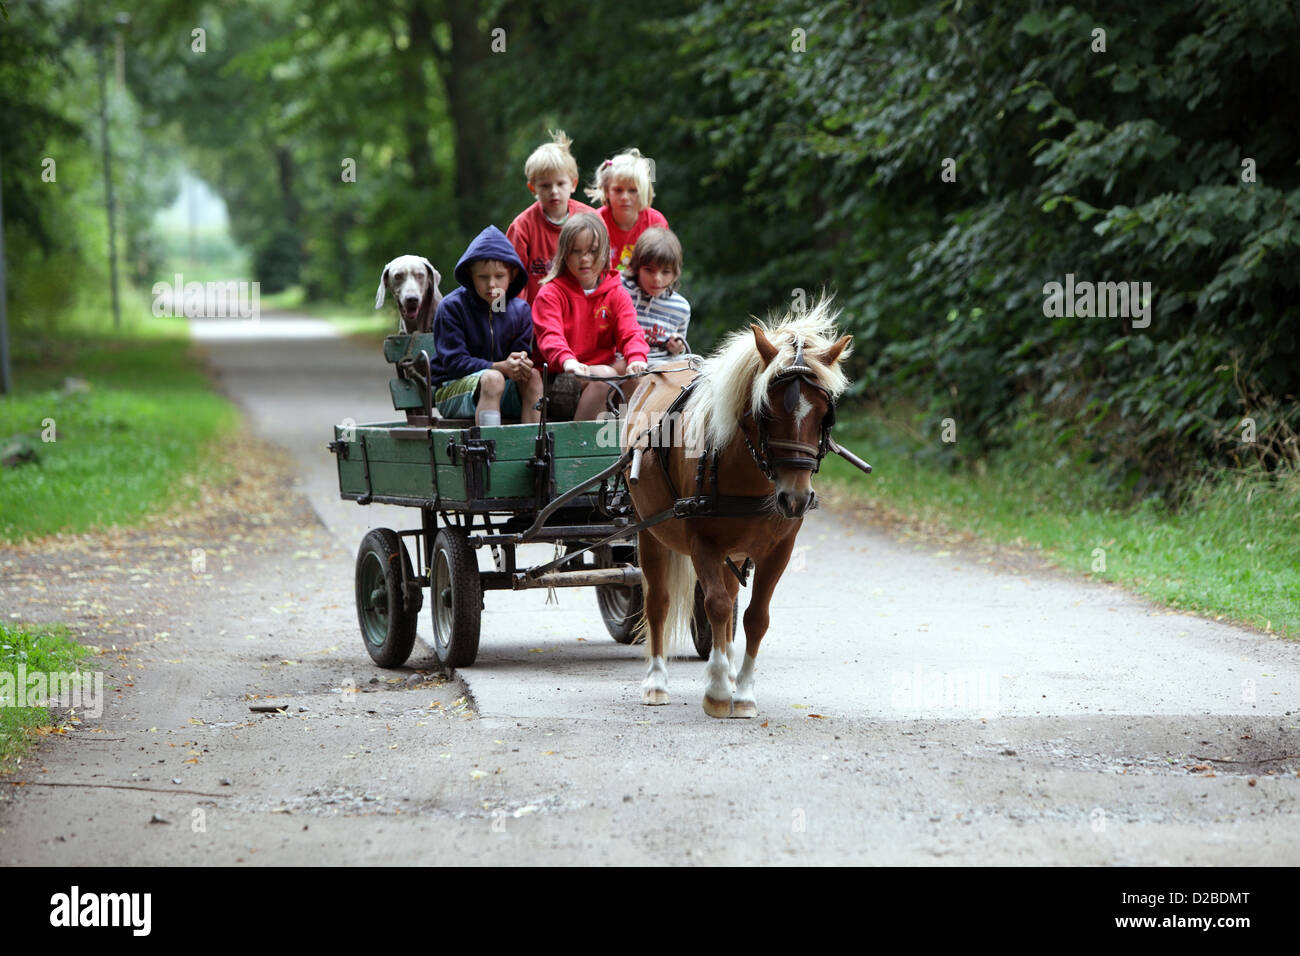 Pomerania, Germany, children get a carriage ride Stock Photo